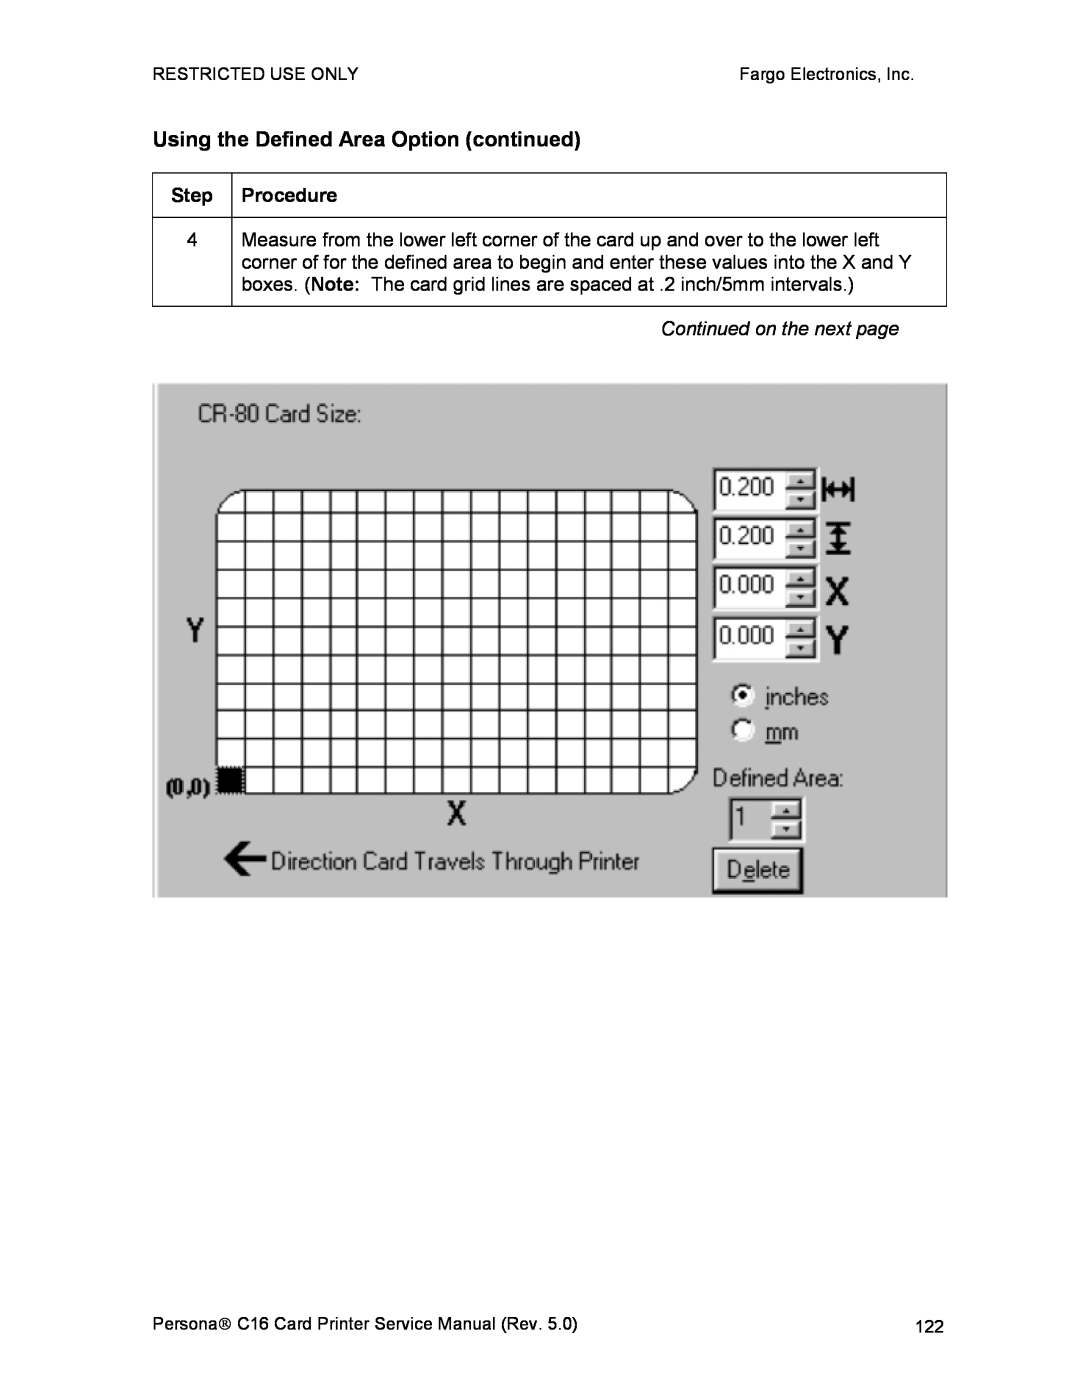 FARGO electronic C16 service manual Using the Defined Area Option continued, Continued on the next page 